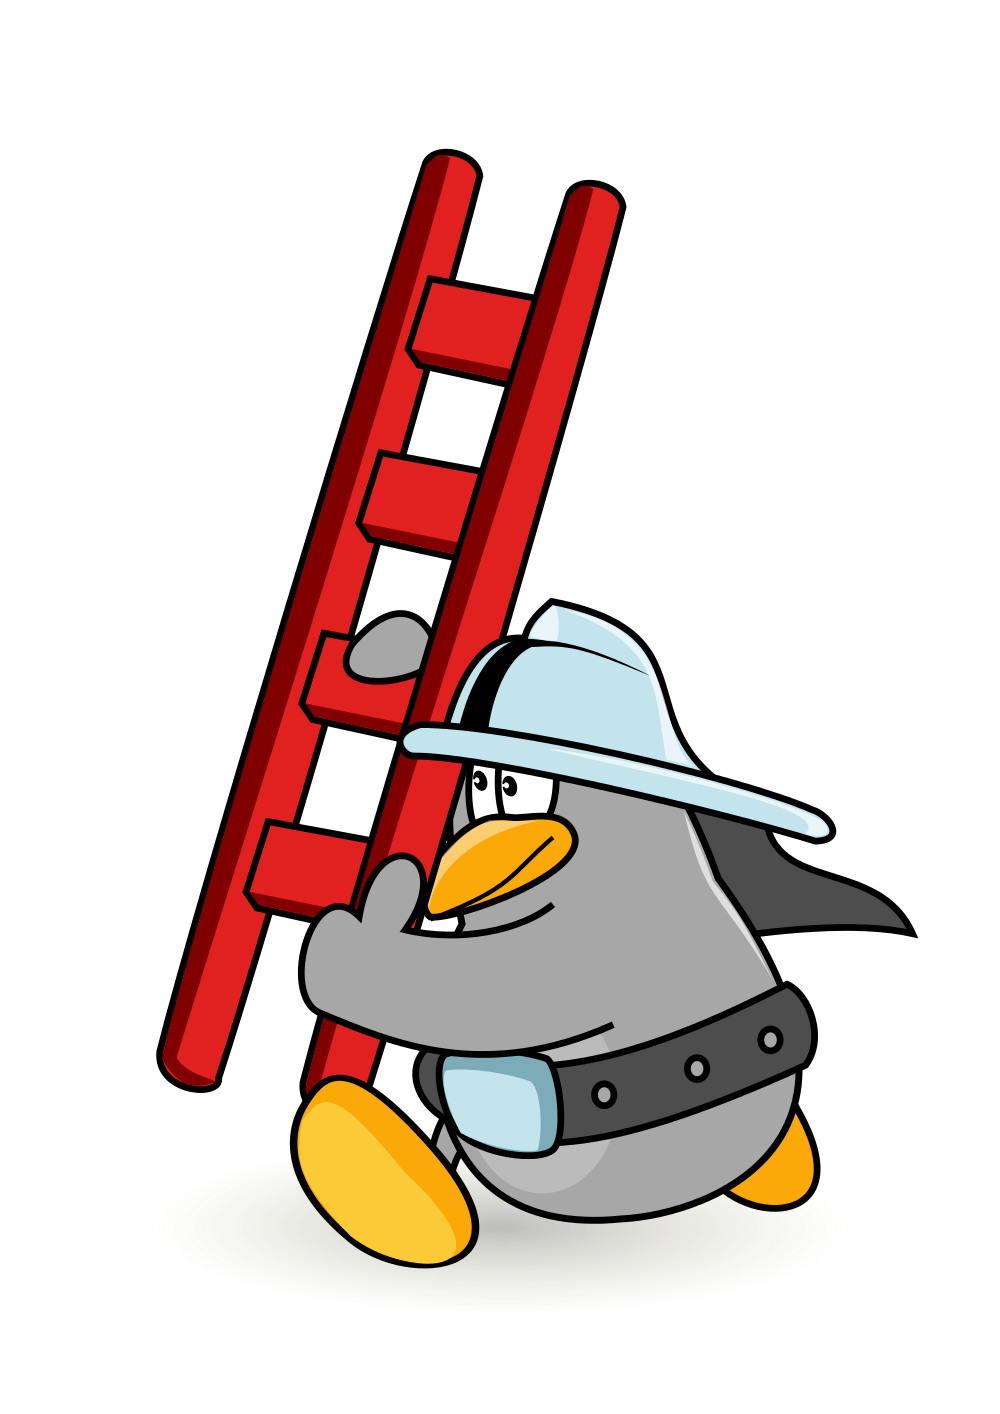 Firefighter clipart ladder. File fireman by mimooh